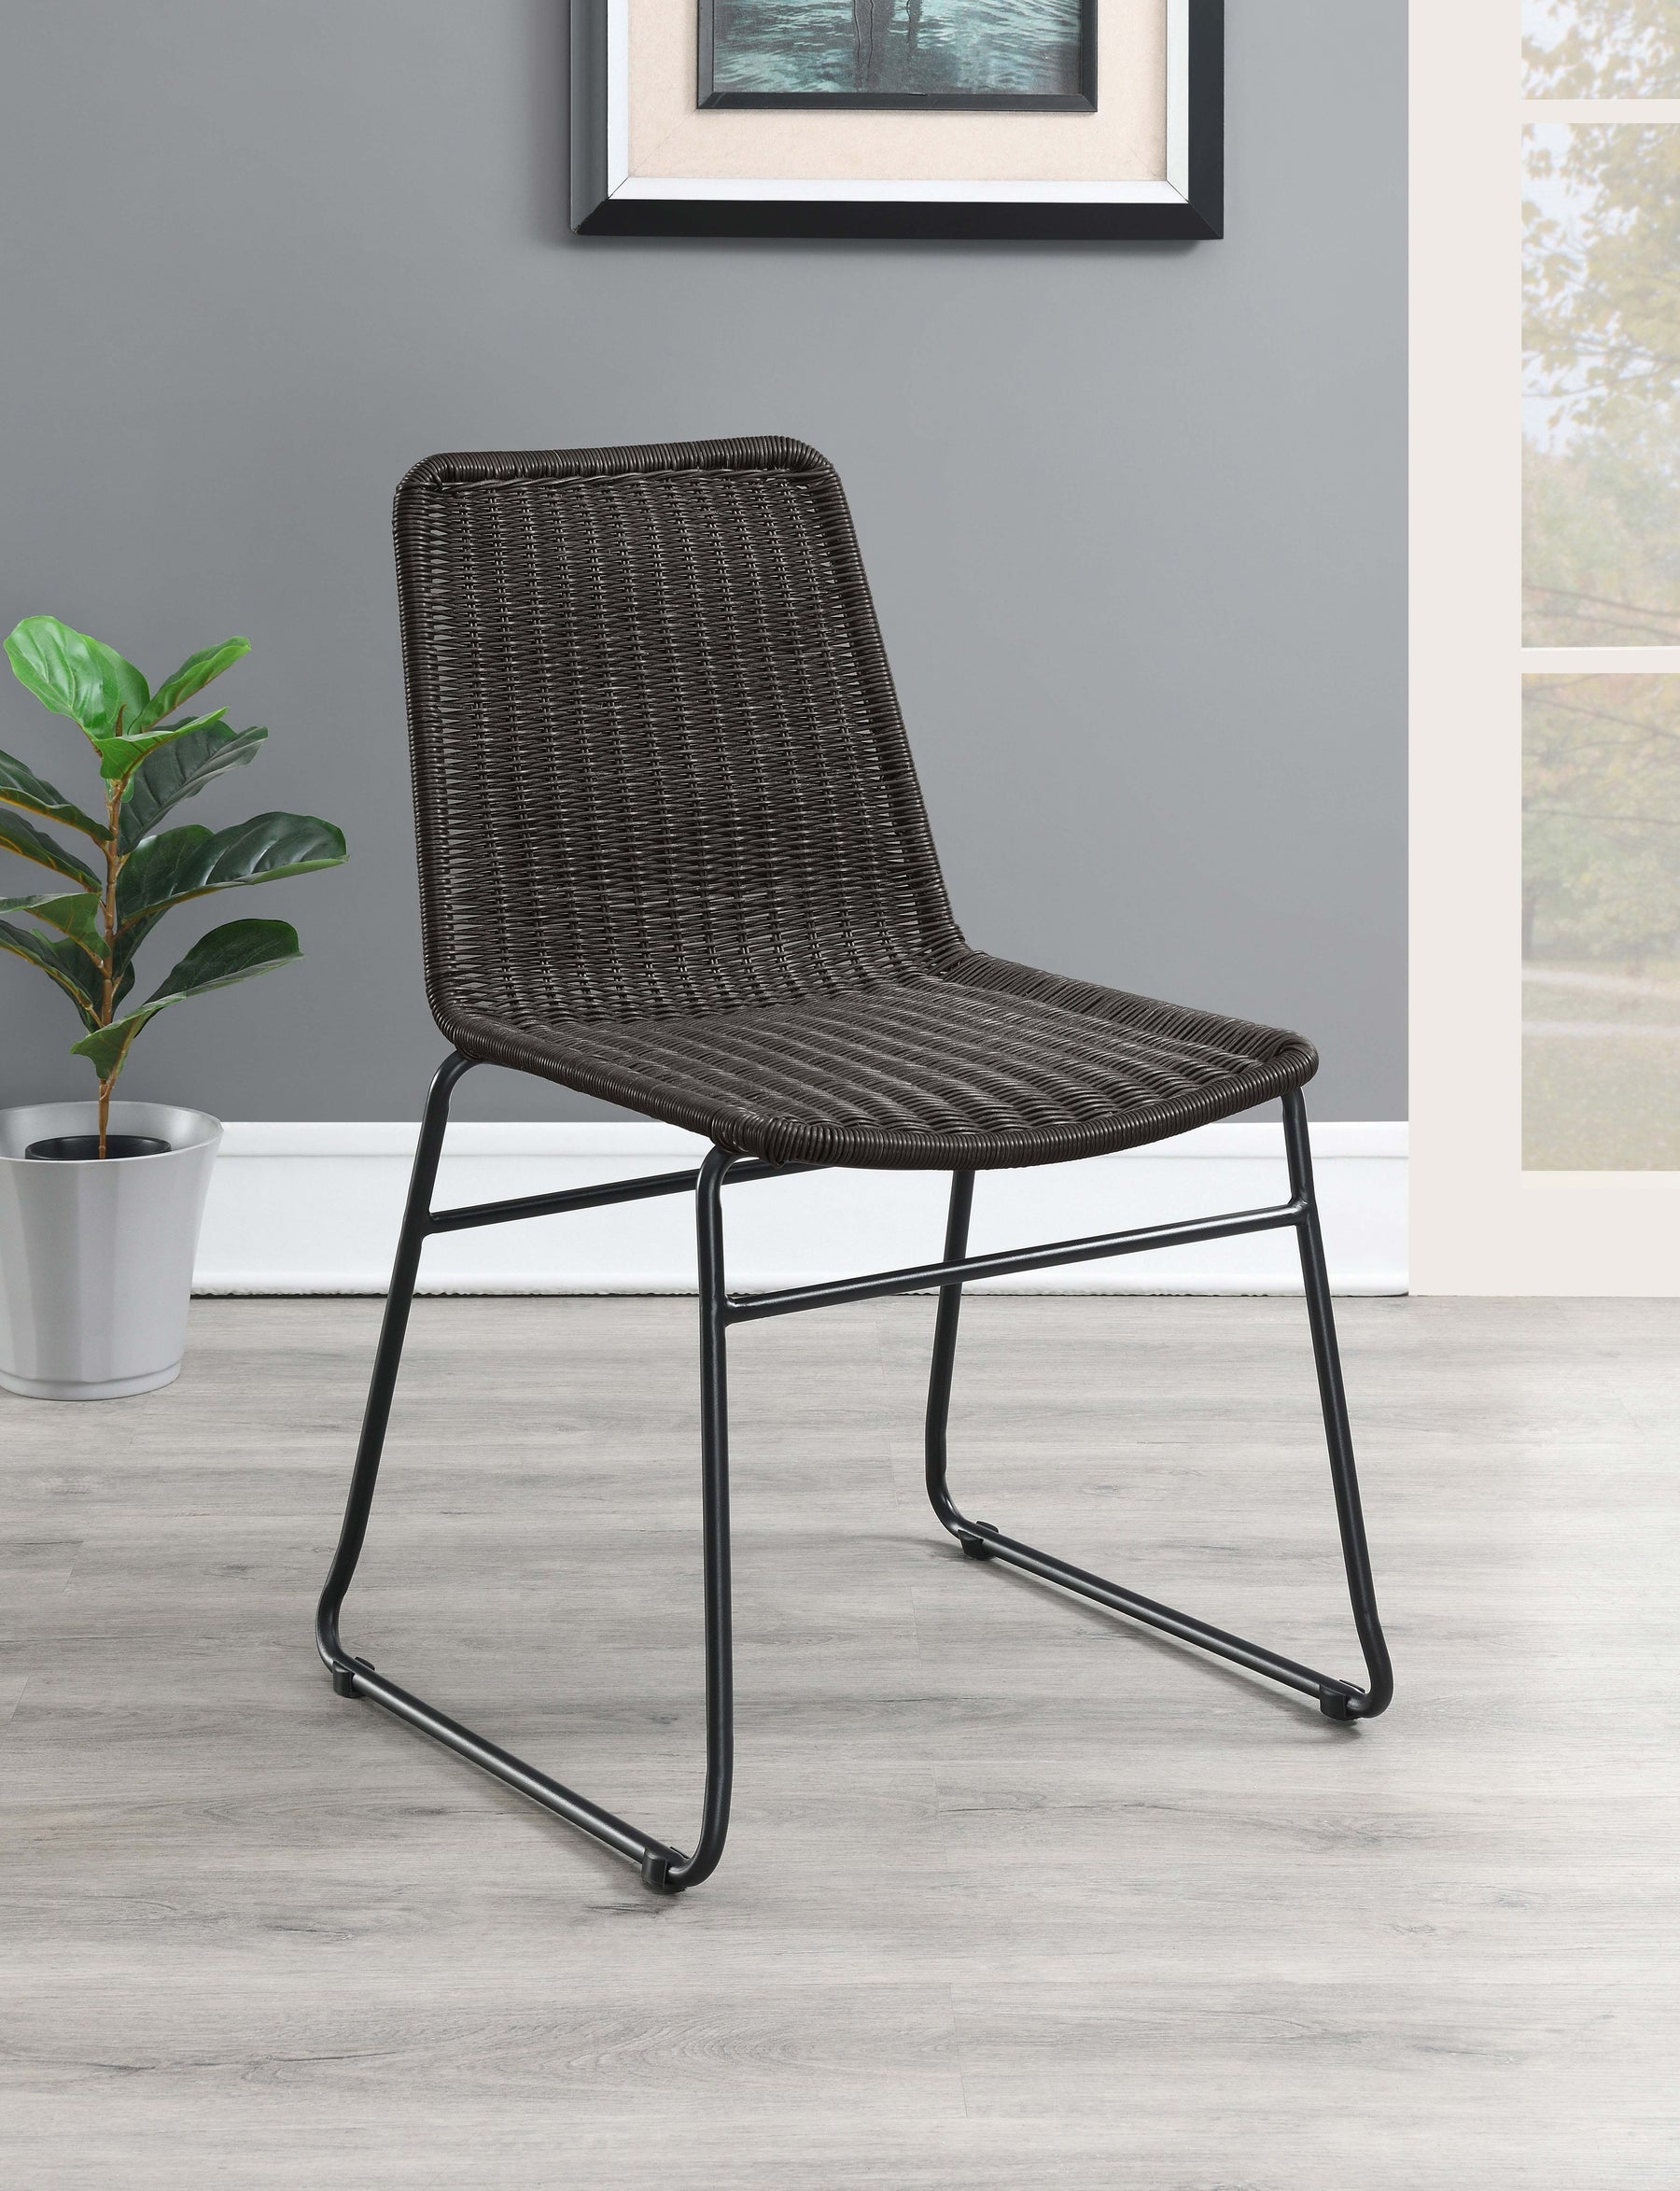 Dacy Upholstered Dining Chairs (Set of 2) Brown and Sandy Black Dacy Upholstered Dining Chairs (Set of 2) Brown and Sandy Black Half Price Furniture